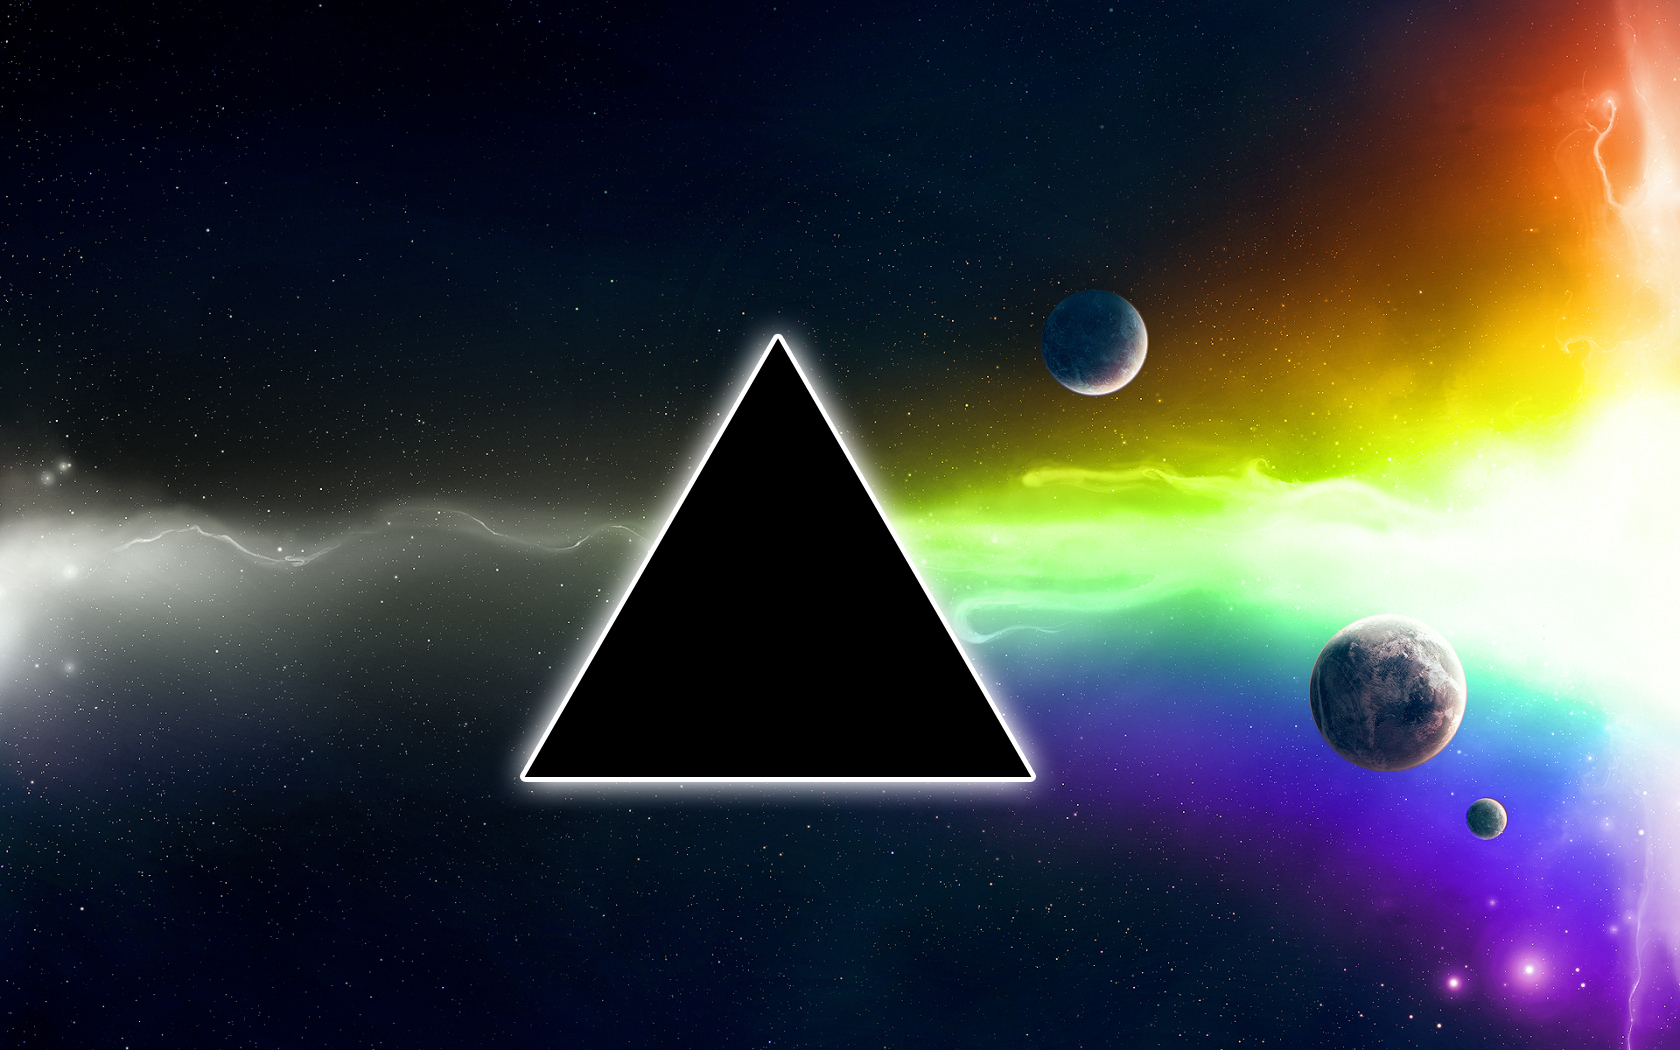 Pink Floyd Image HD Wallpaper And Background Photos